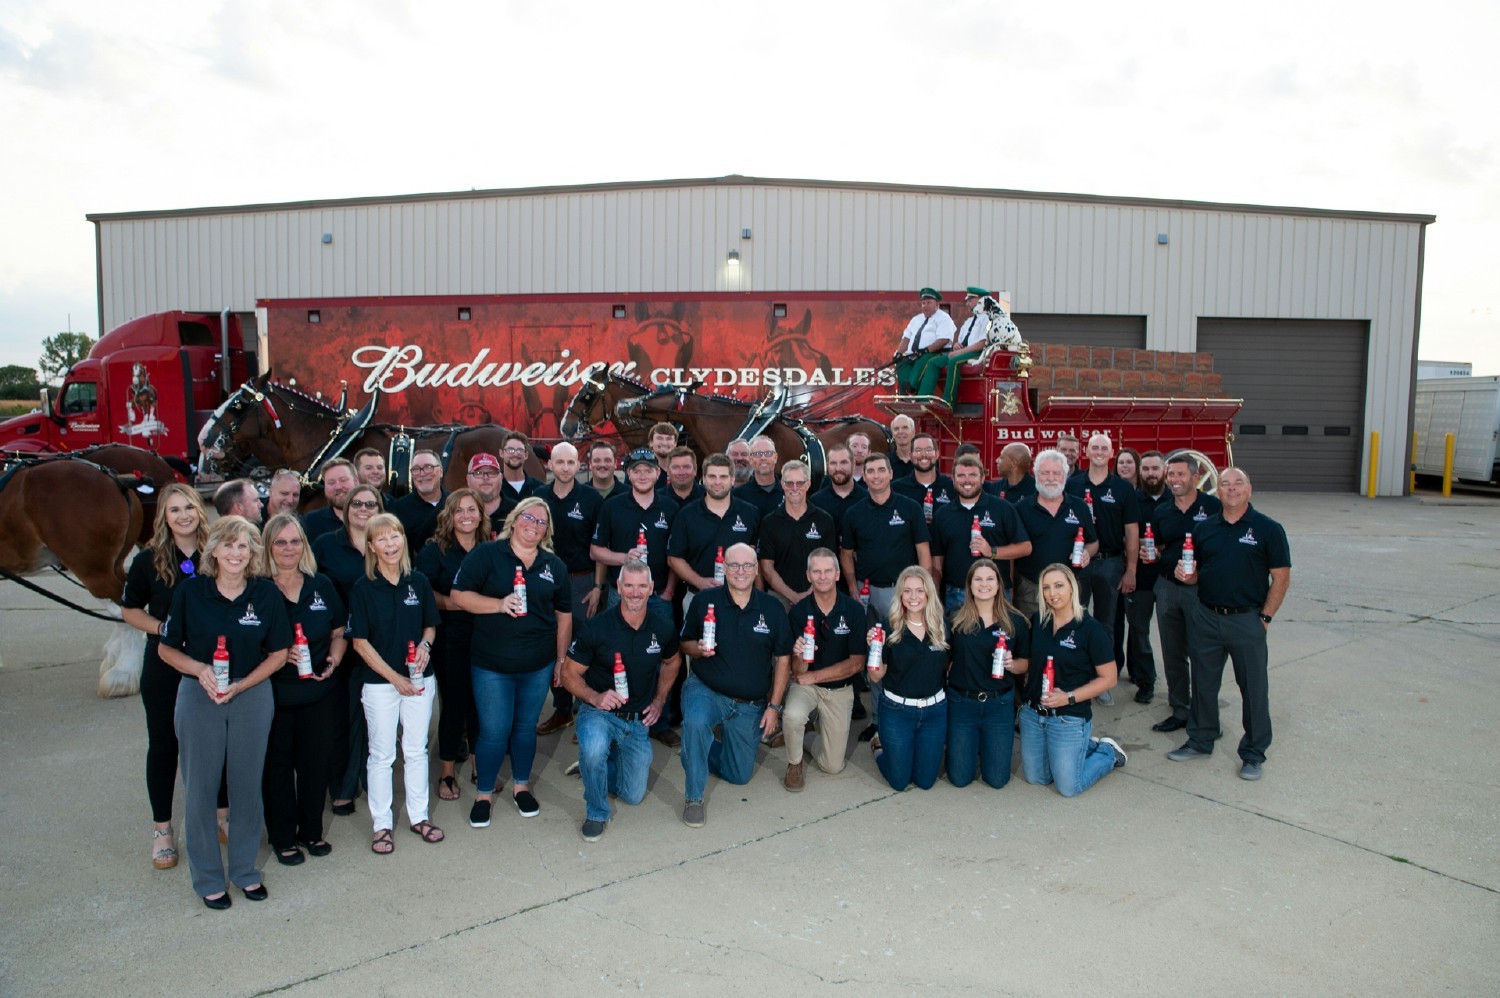 Recently G&M celebrated it's 75th anniversary, which included a visit from the famous Anheuser Busch Clydesdales. 